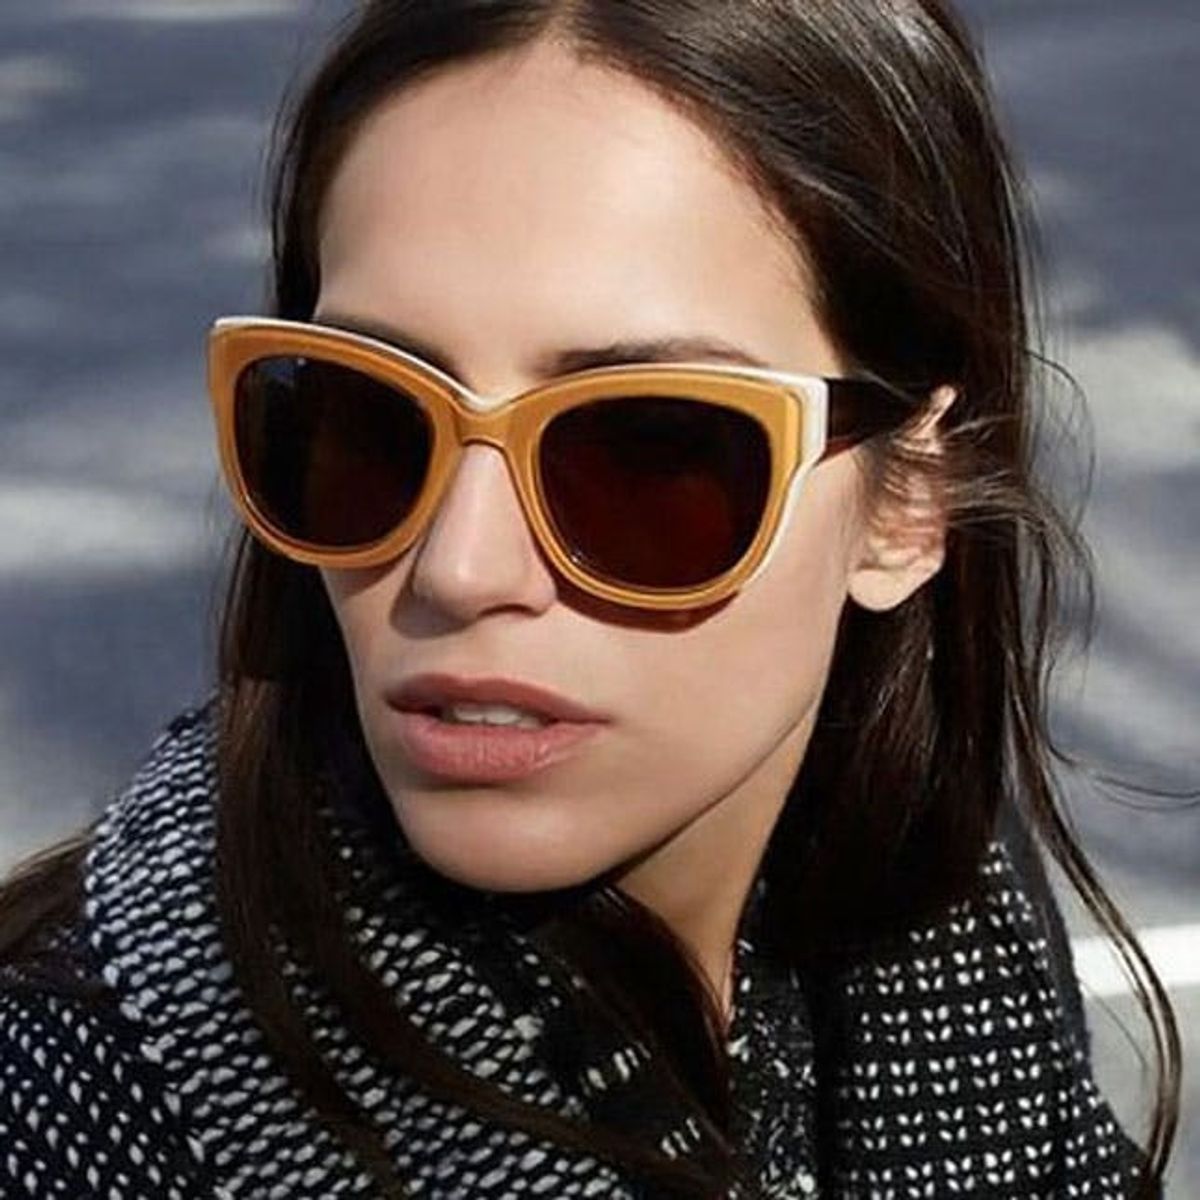 Warby Parker Just Released Some Seriously Glam Sunglasses